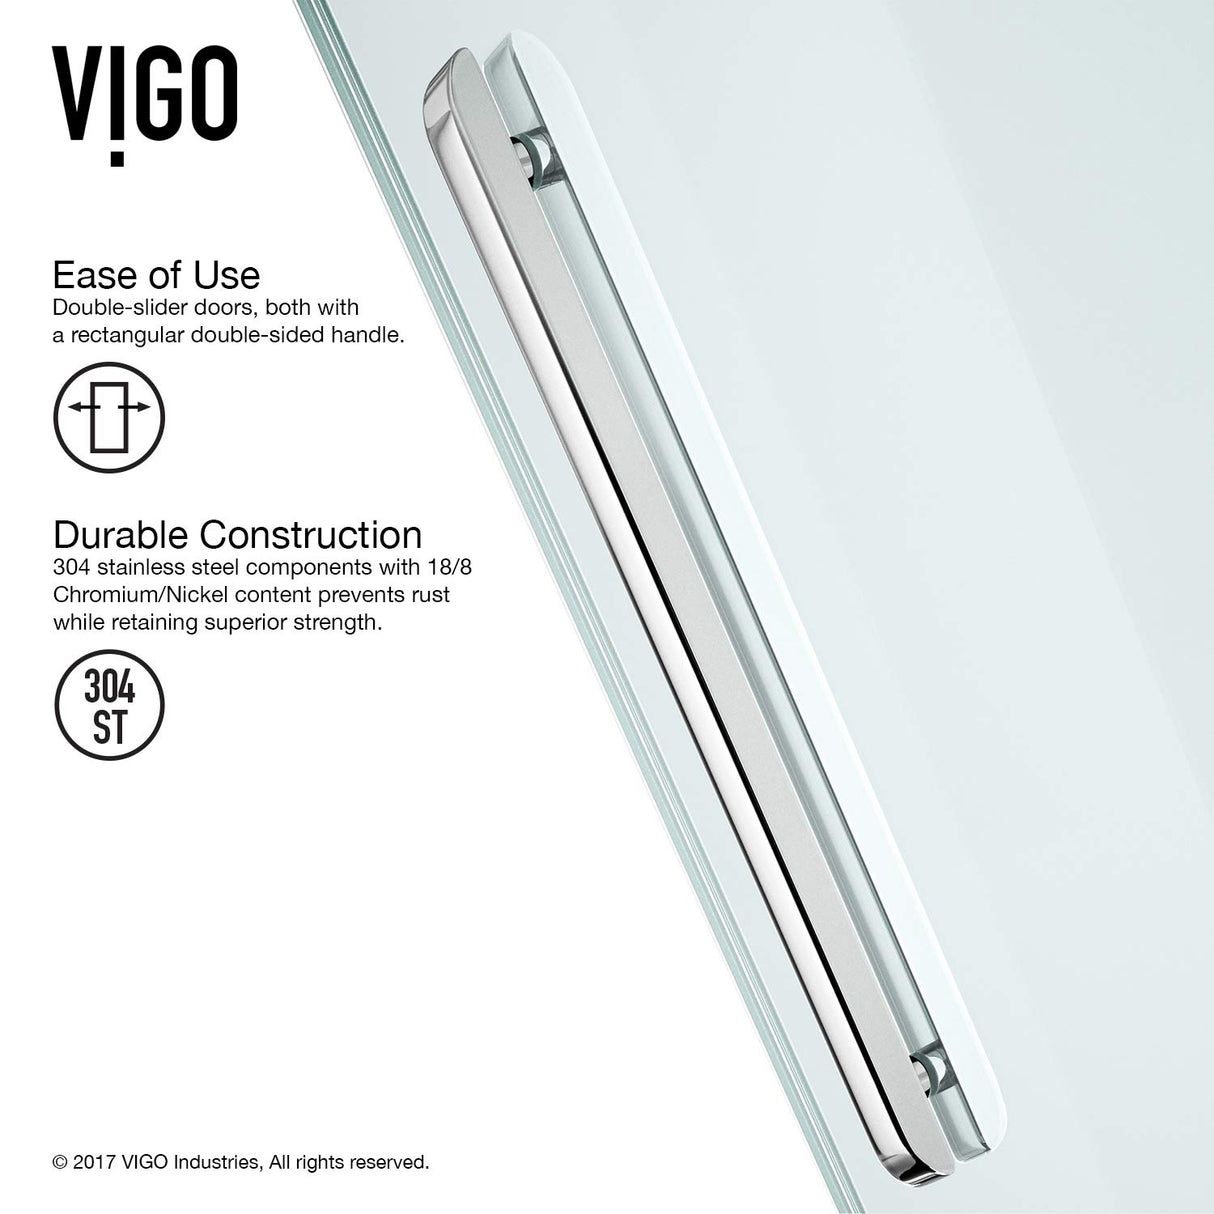 VIGO Adjustable 59-61" W x 74" H Caspian Frameless Sliding Rectangle Shower Door with Clear Tempered Glass, Reversible Door Handle and Stainless Steel Hardware in Chrome-VG6046CHCL6074